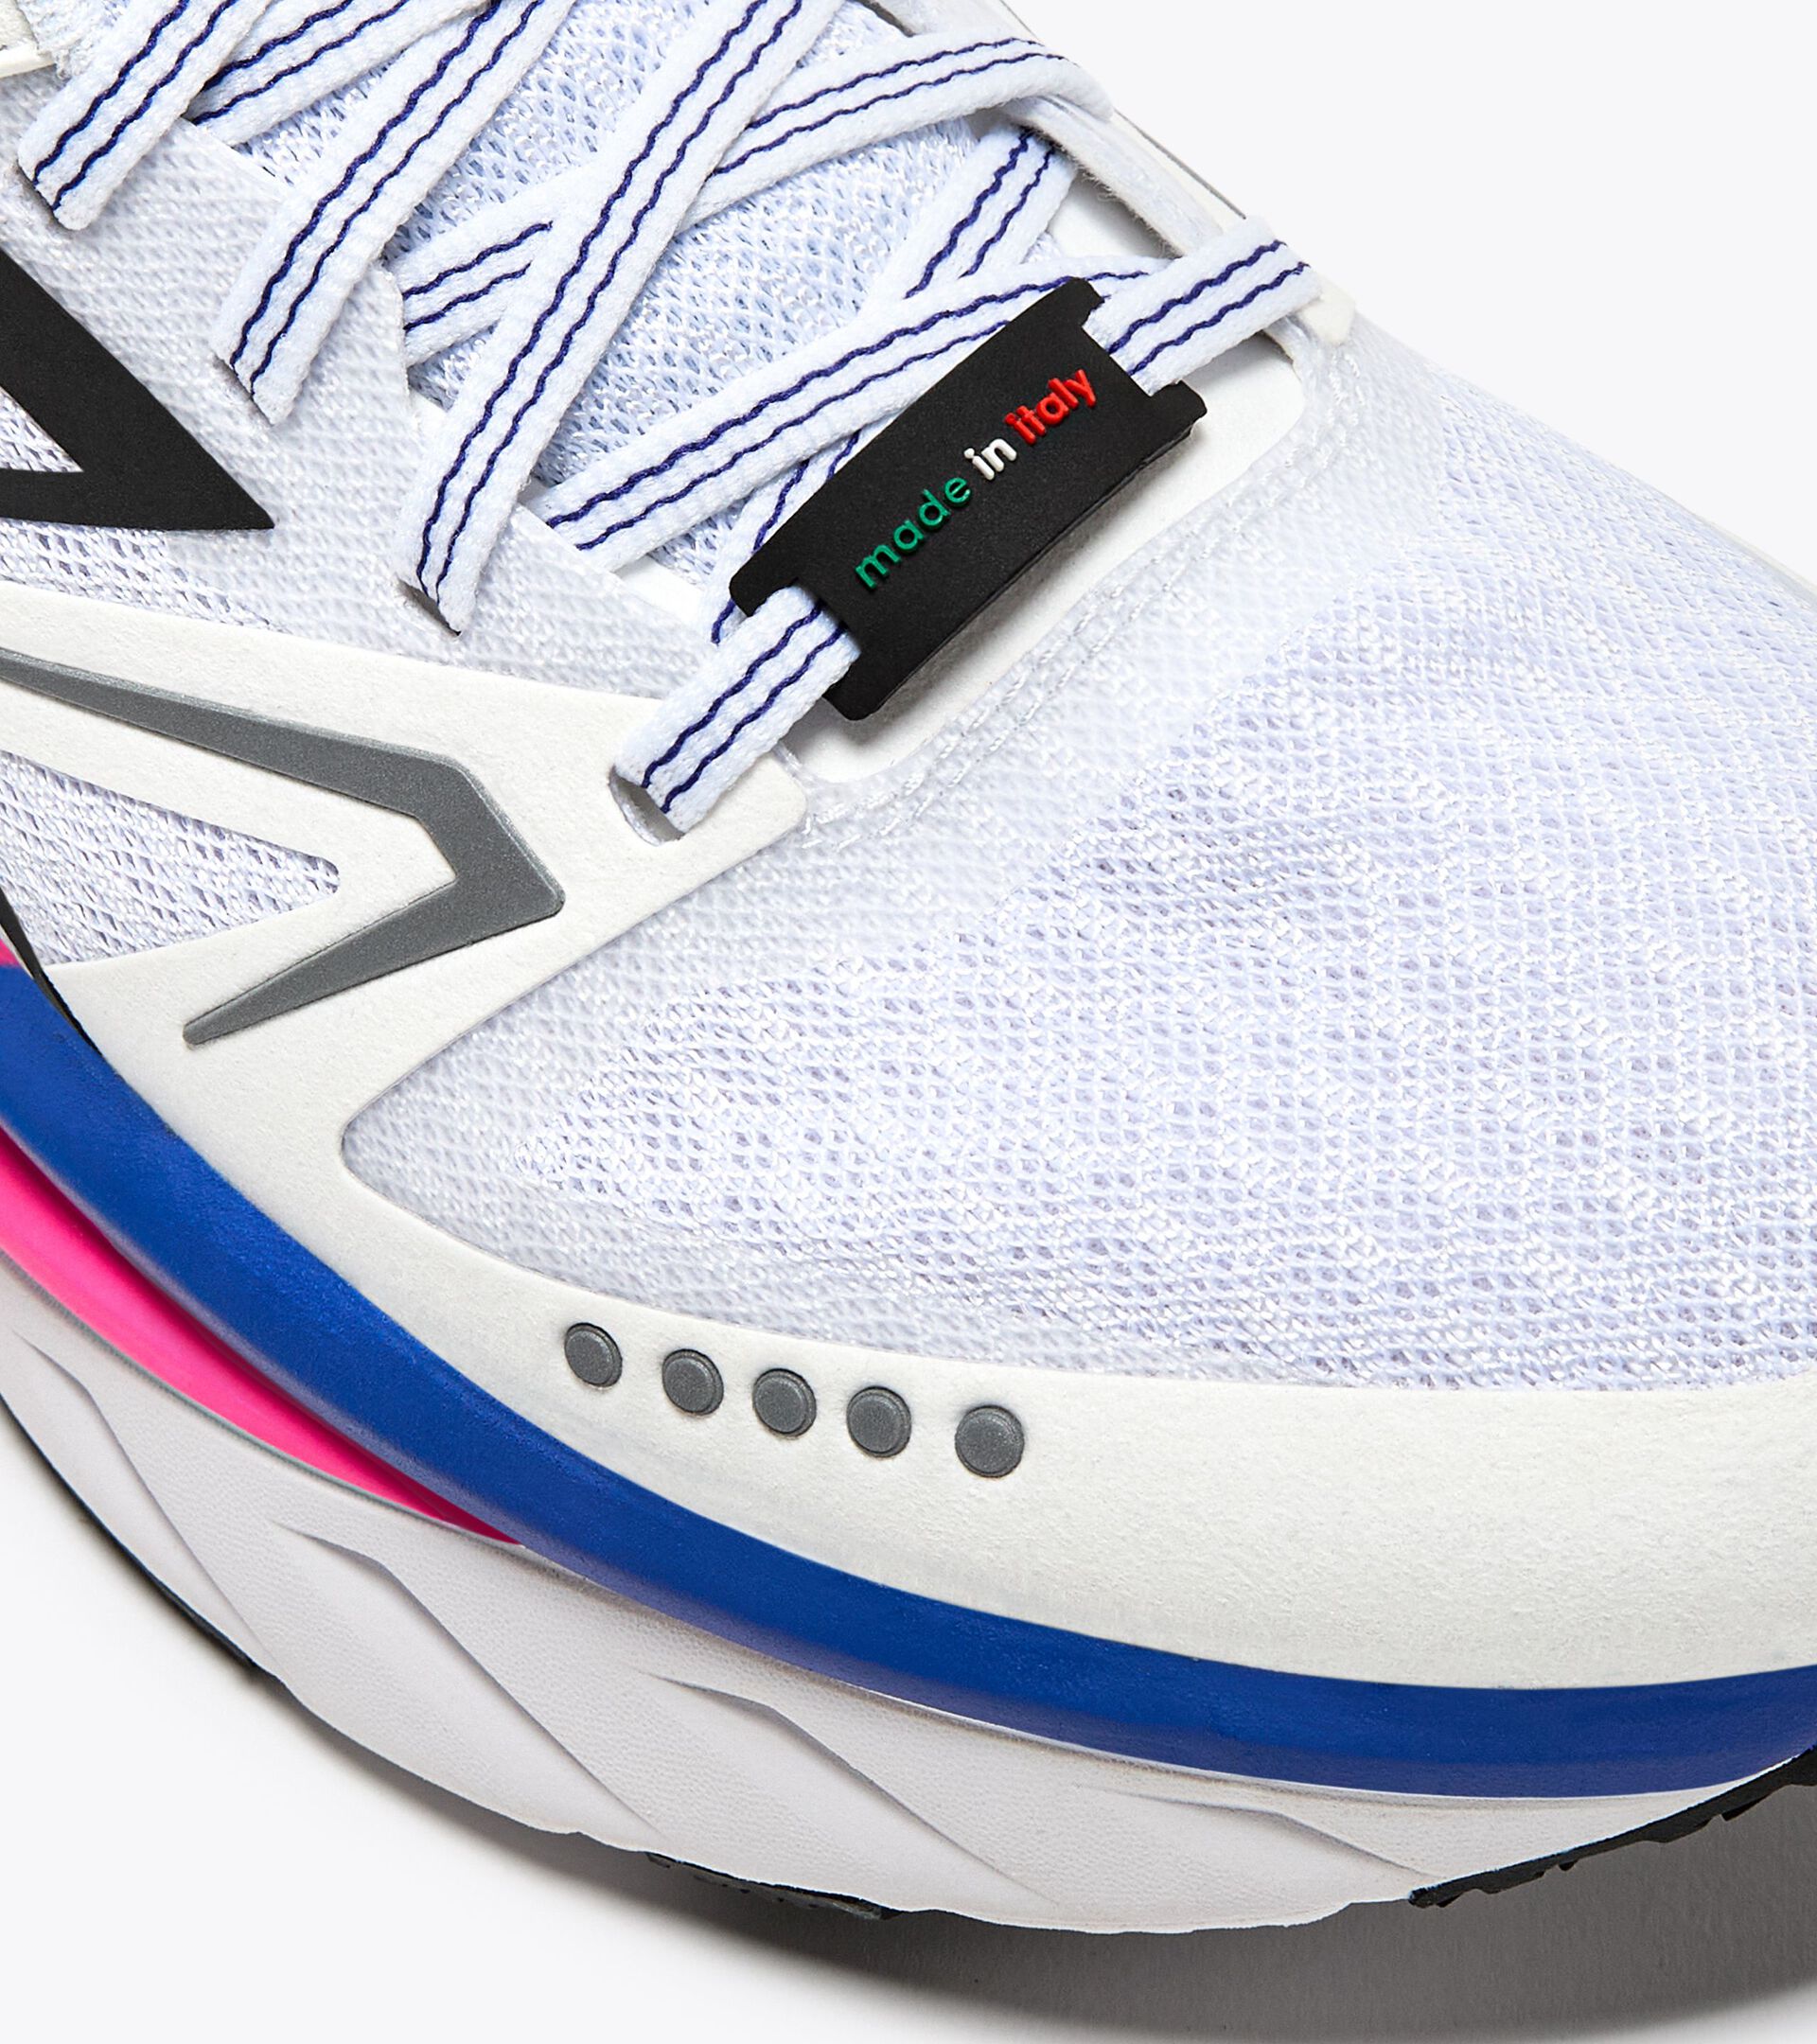 Made in Italy running shoe - Lightness and cushioning - Unisex ATOMO V7000-2 WHITE/SURF THE WEB/PINK FLUO - Diadora